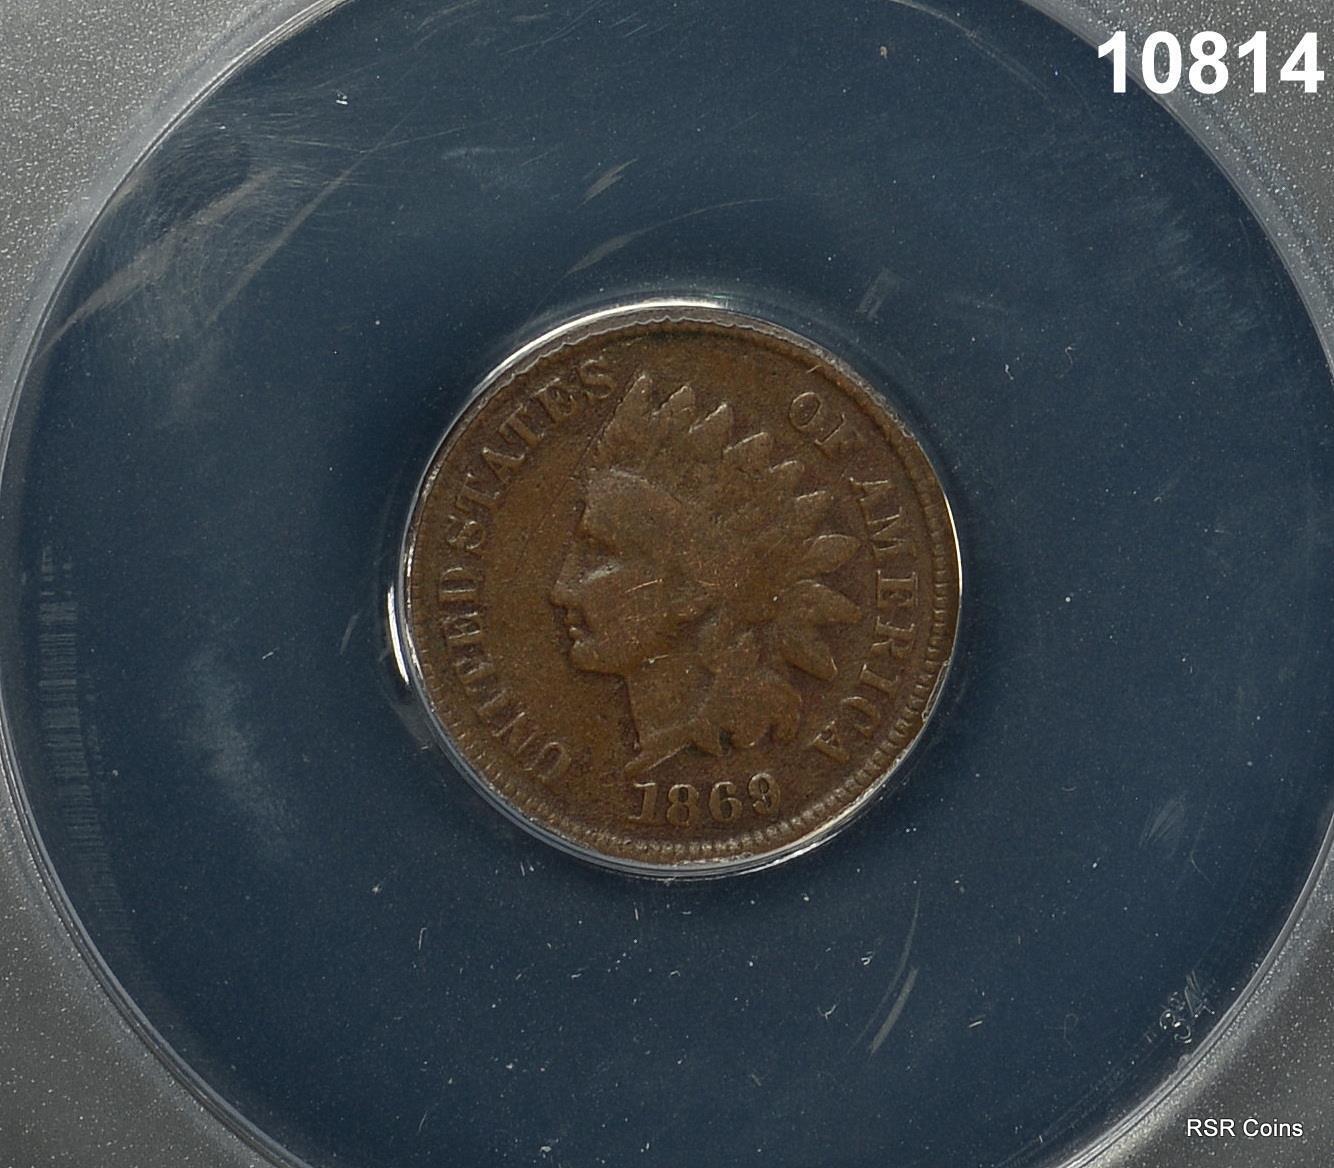 1869 INDIAN HEAD CENT ANACS CERTIFIED VG8 CORRODED SCRATCHED #10814